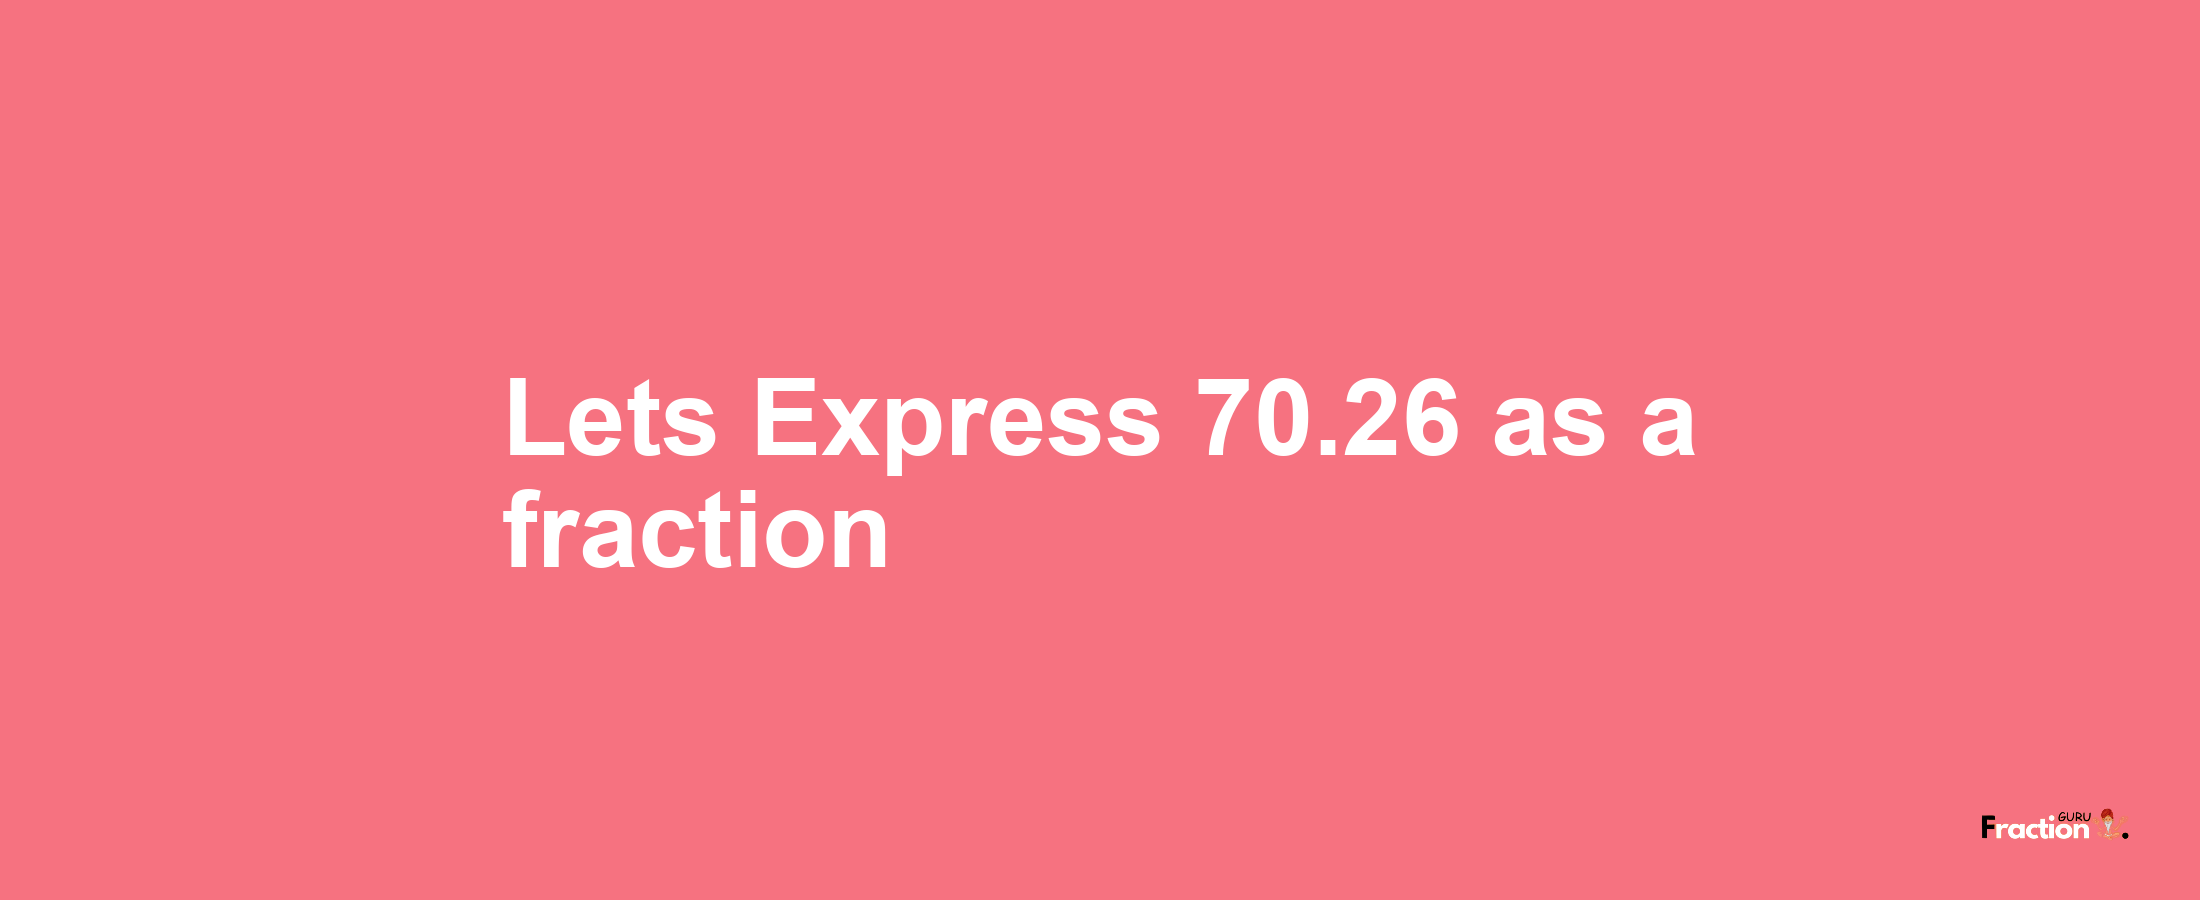 Lets Express 70.26 as afraction